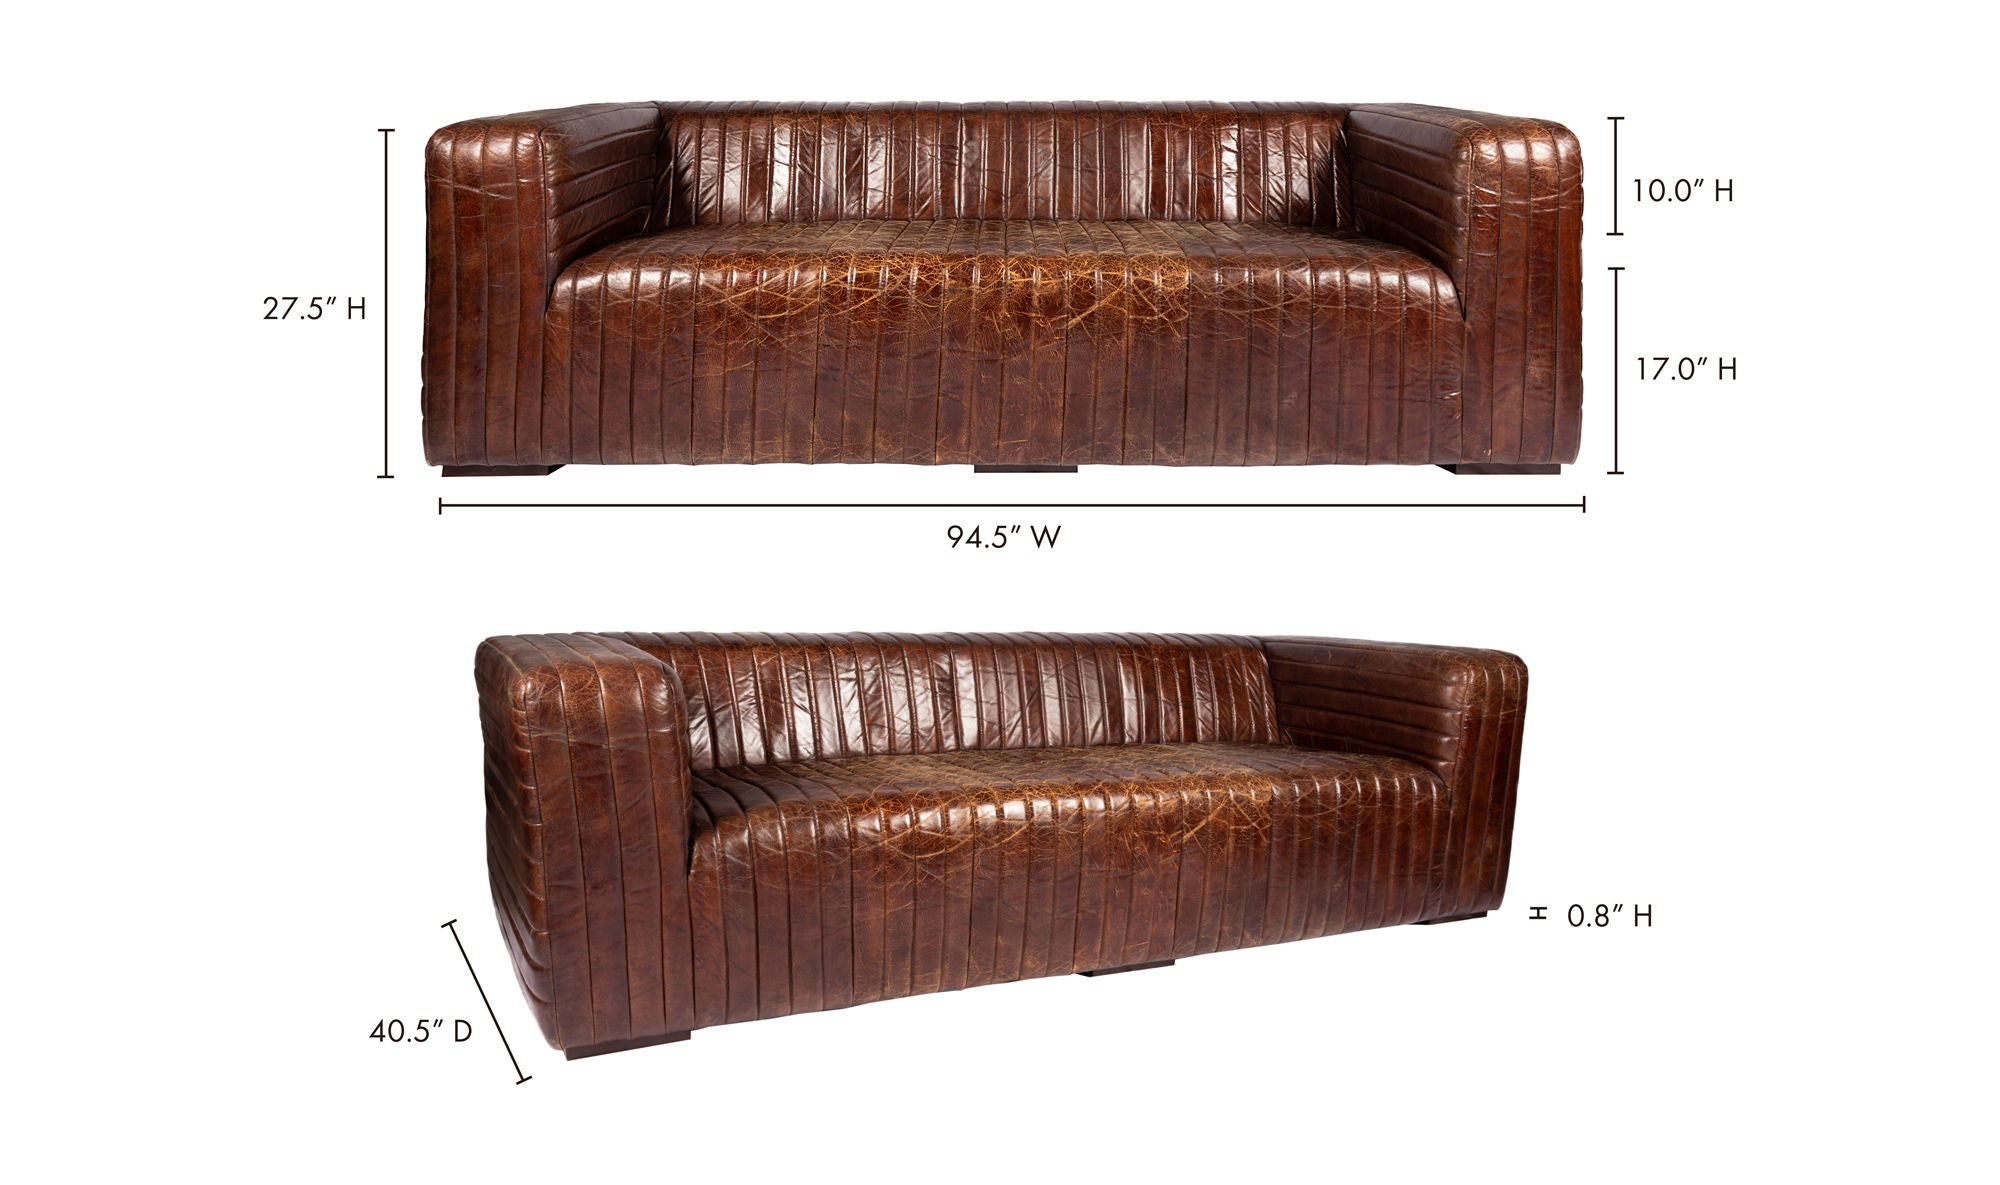 Castle Sofa - Dark Brown Top-Grain Leather - Channel-Stitched Design - Stylish Living Room Furniture